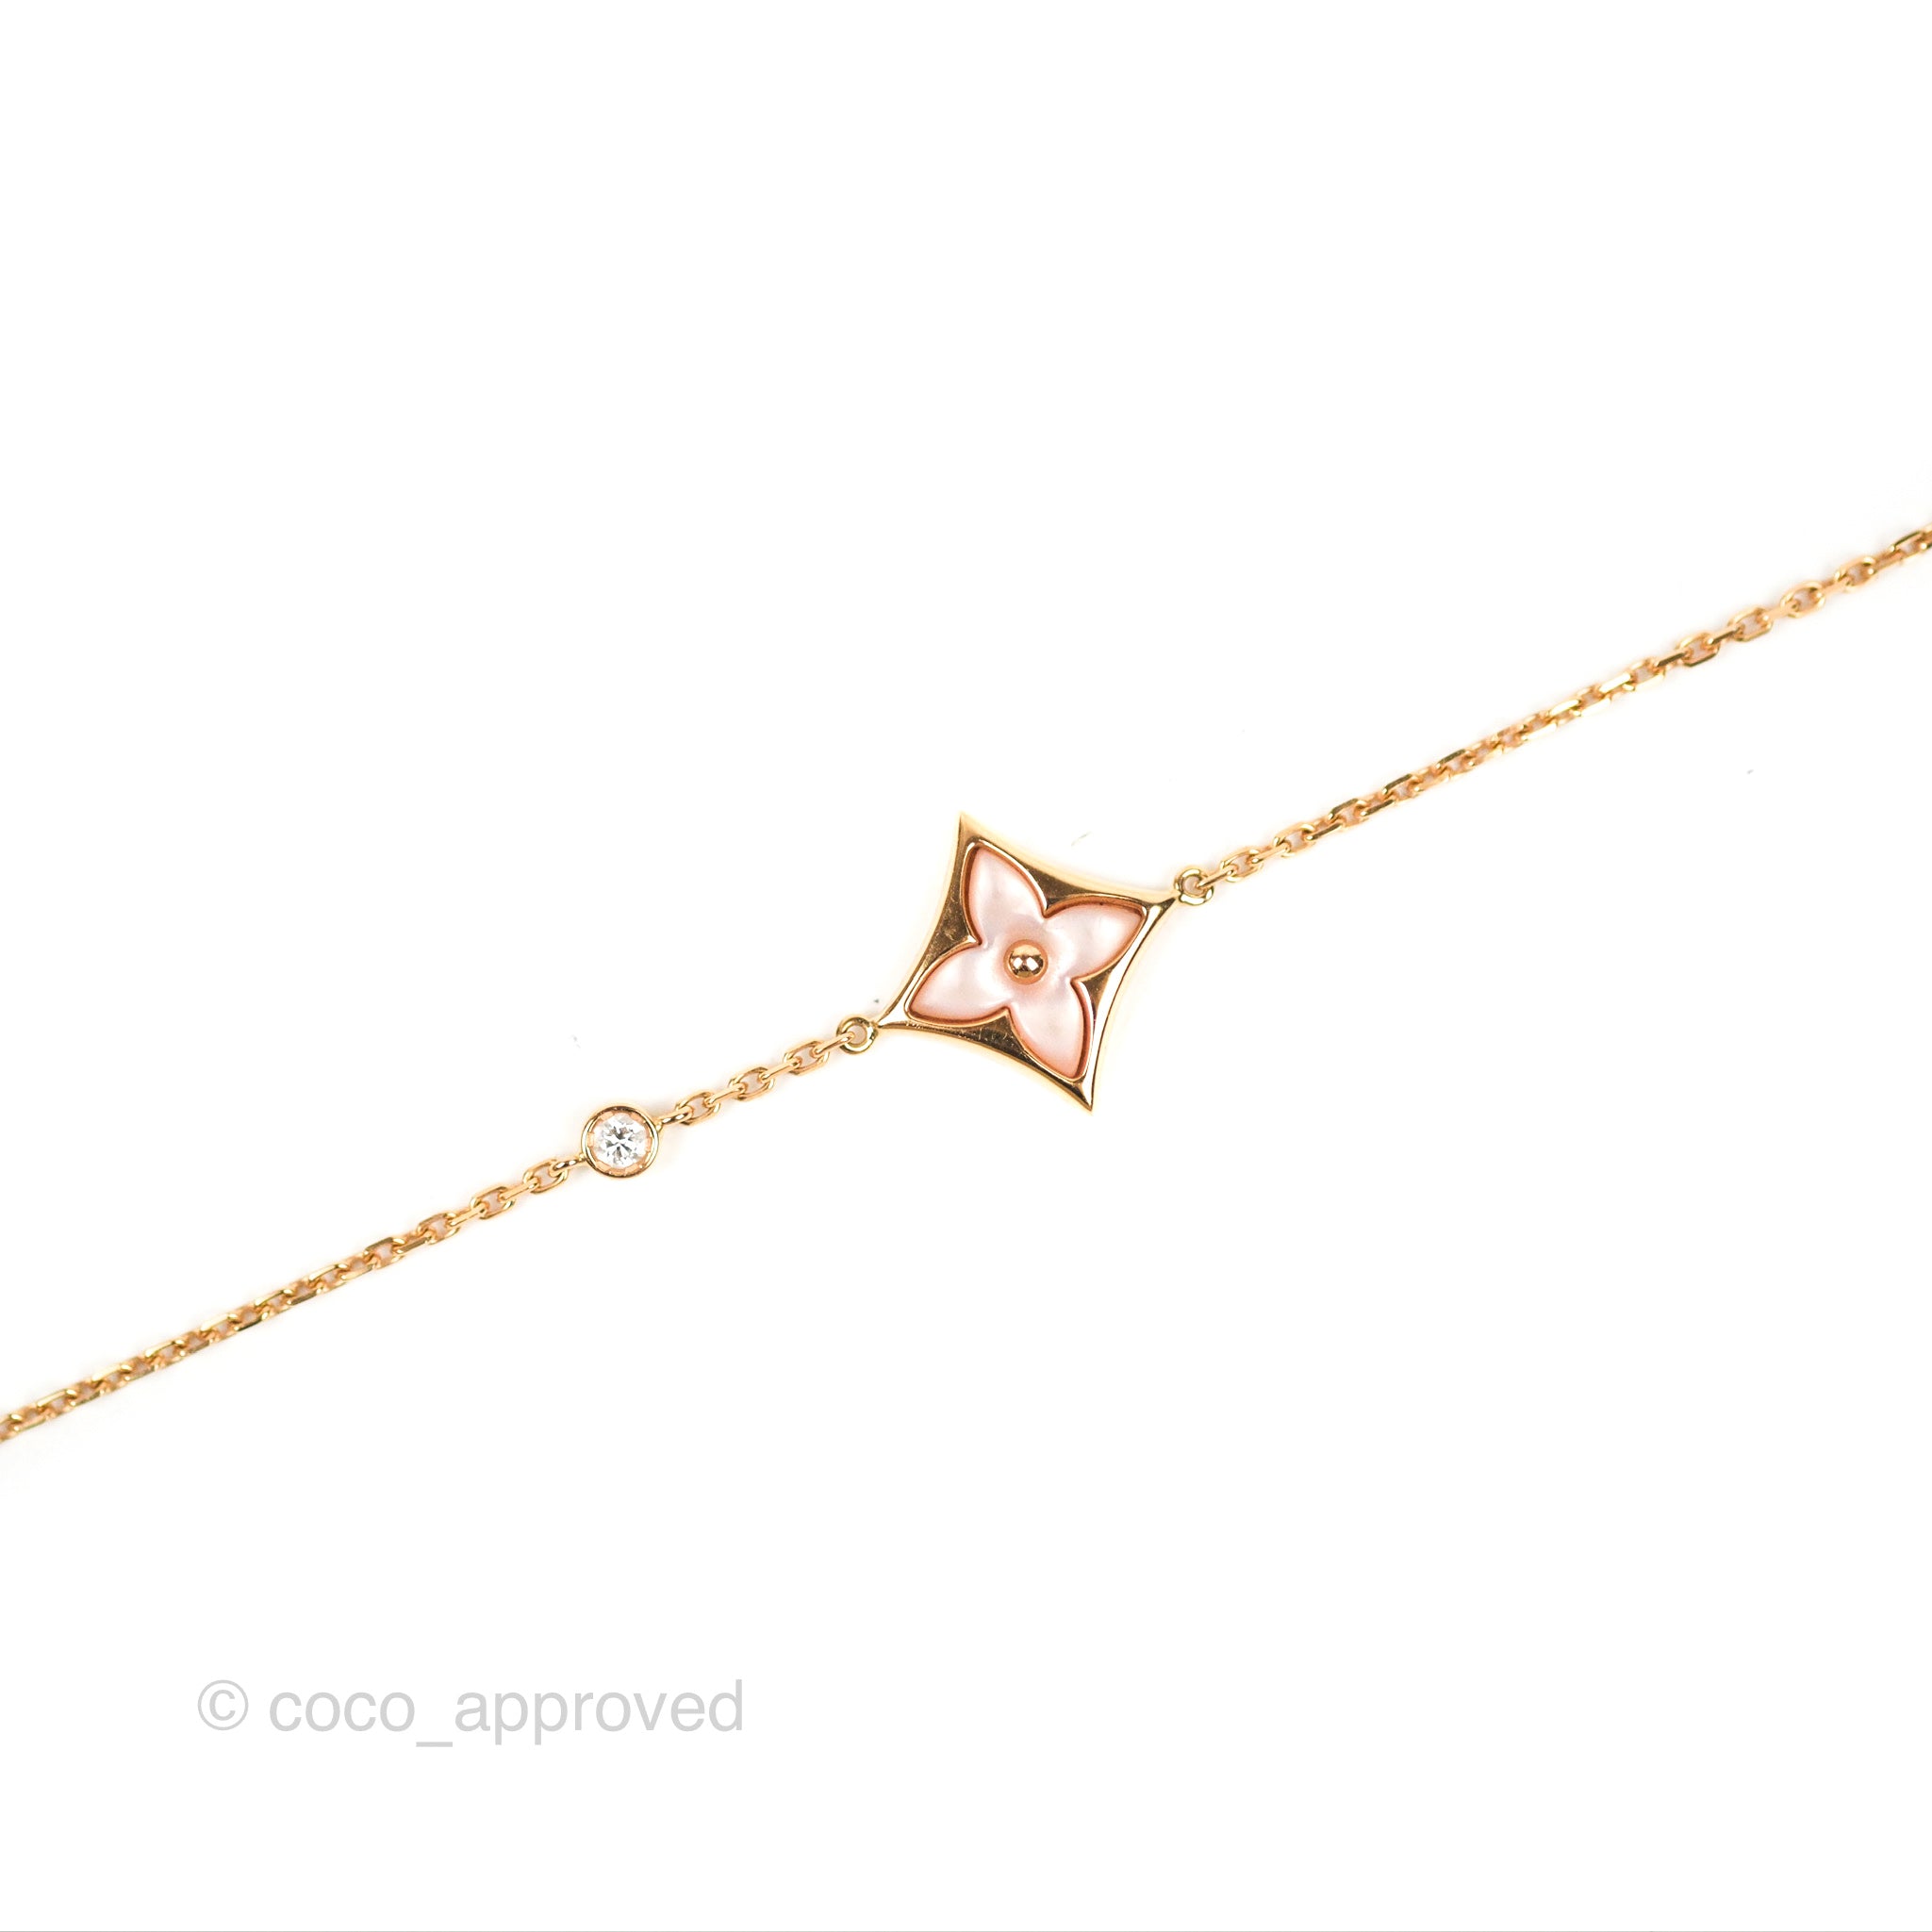 Louis Vuitton Color Blossom Bb Star Bracelet, Pink Gold, Pink Mother-of-Pearl and Diamond Pink. Size NSA